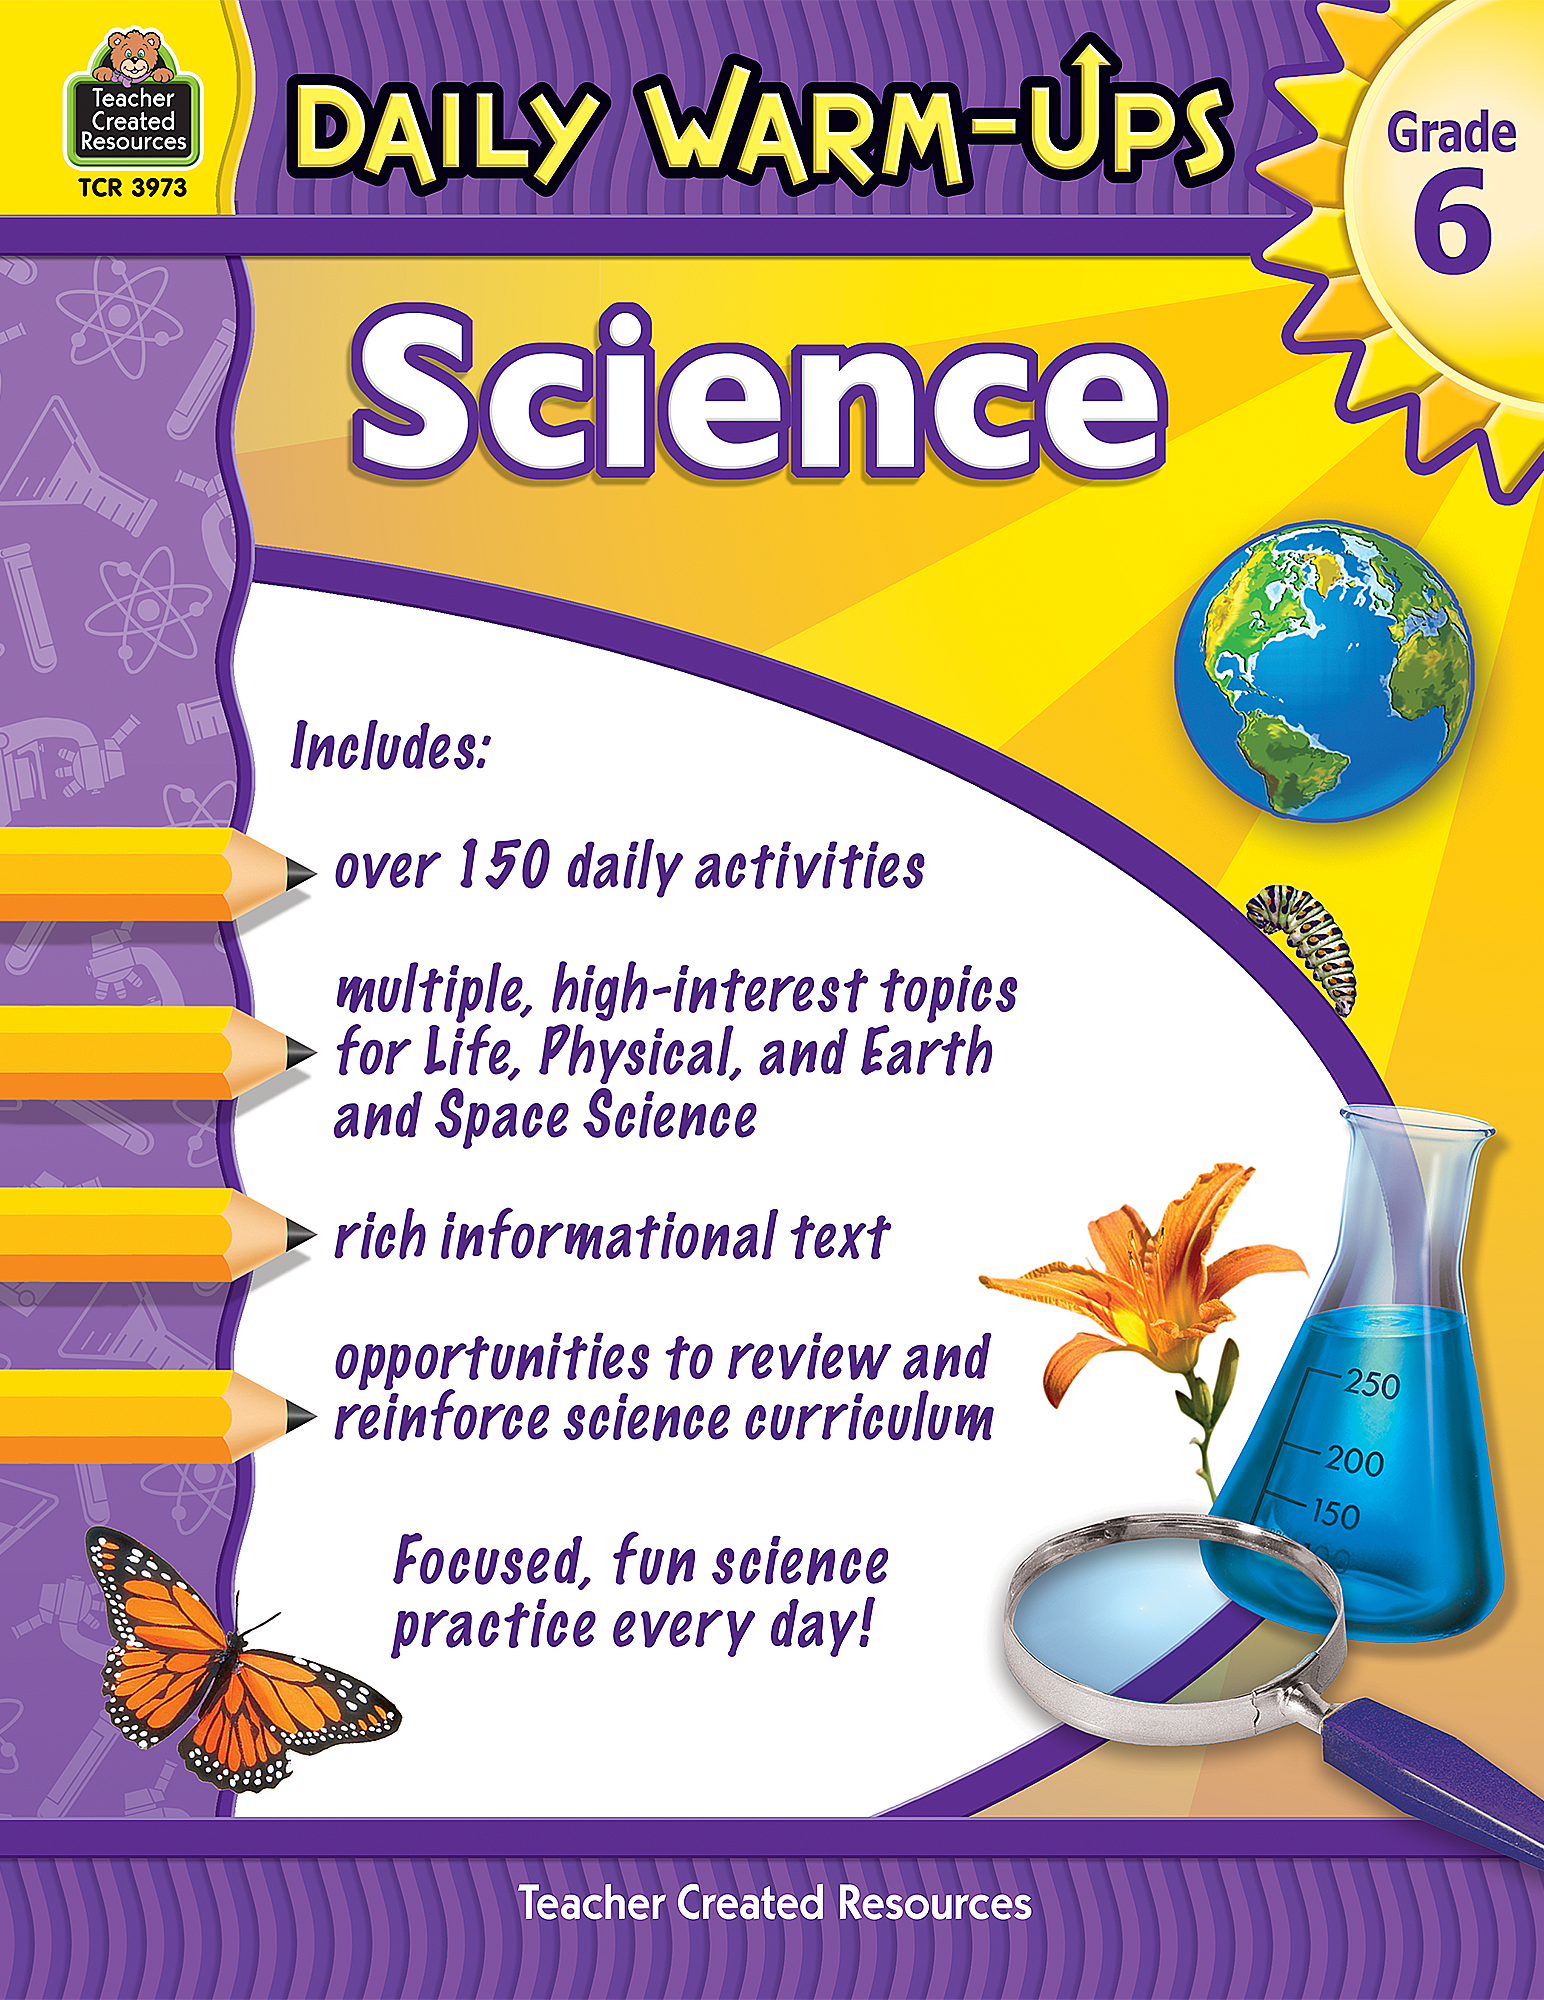 Daily Warm Ups Science Grade 6 TCR3973 Teacher Created Resources